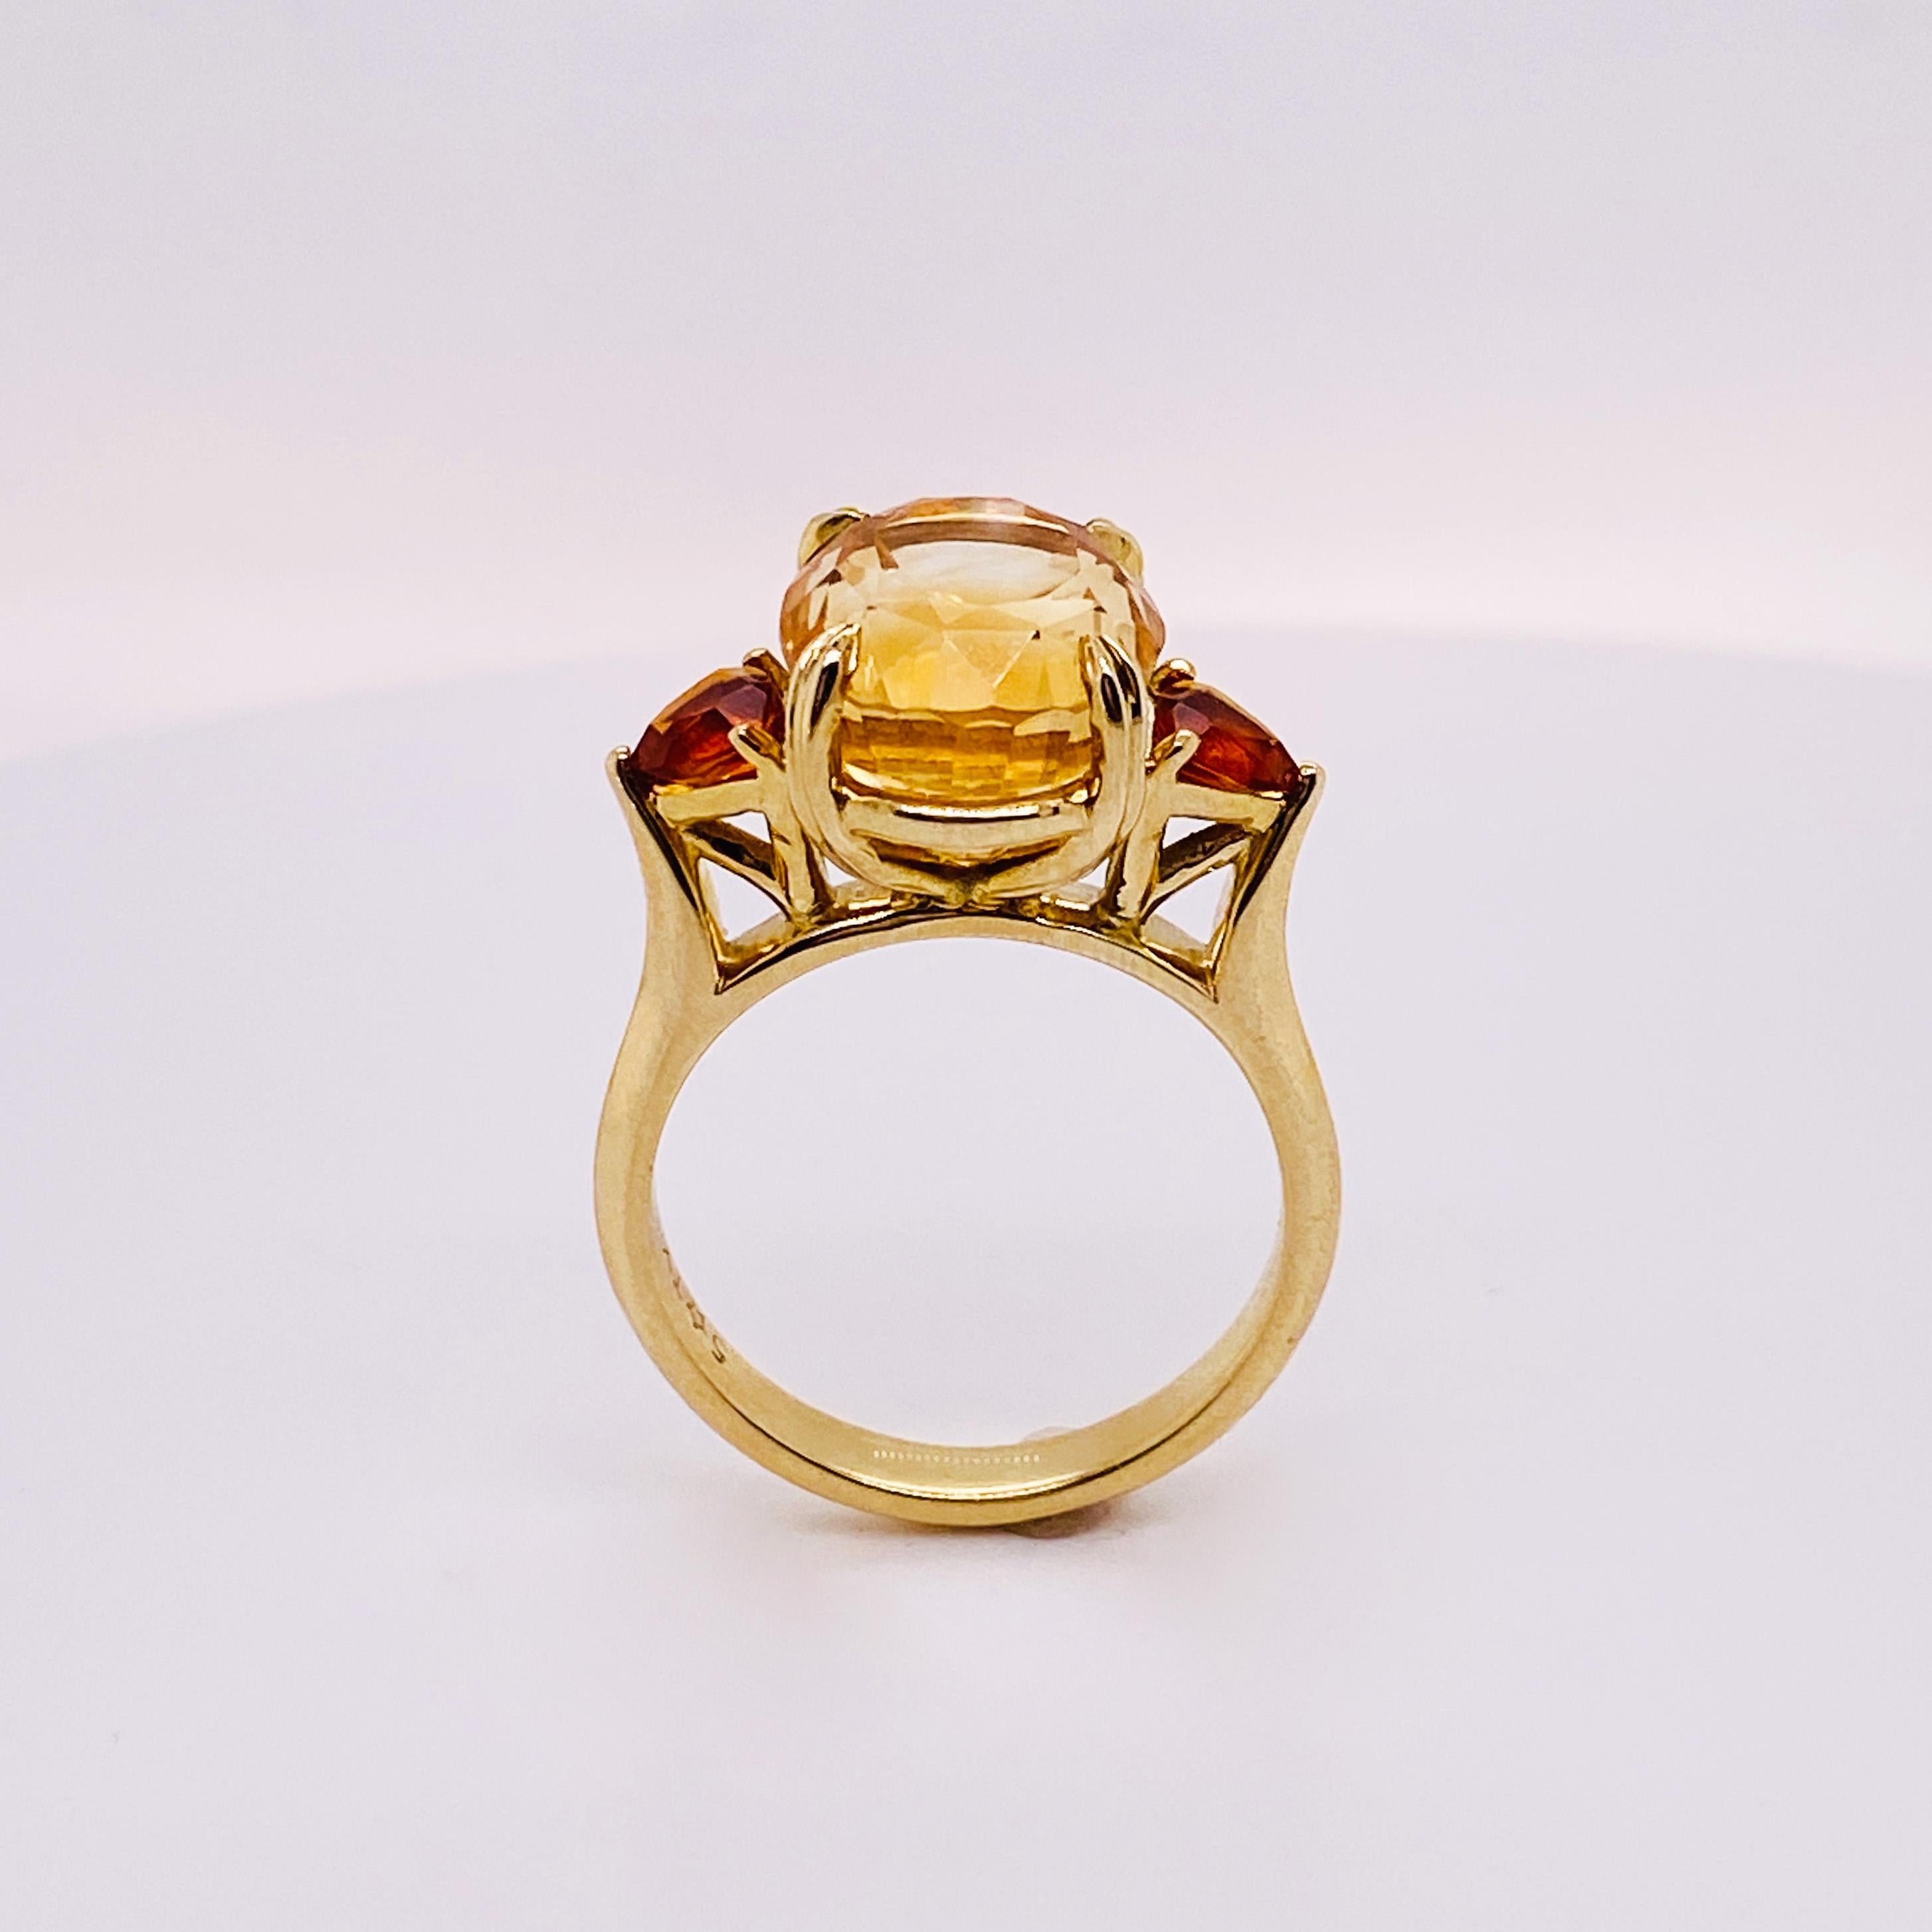 7.12 Carats Citrines, Honey & Mandarin Oranges, Three-Stone Ring in 14K Gold LV In New Condition For Sale In Austin, TX